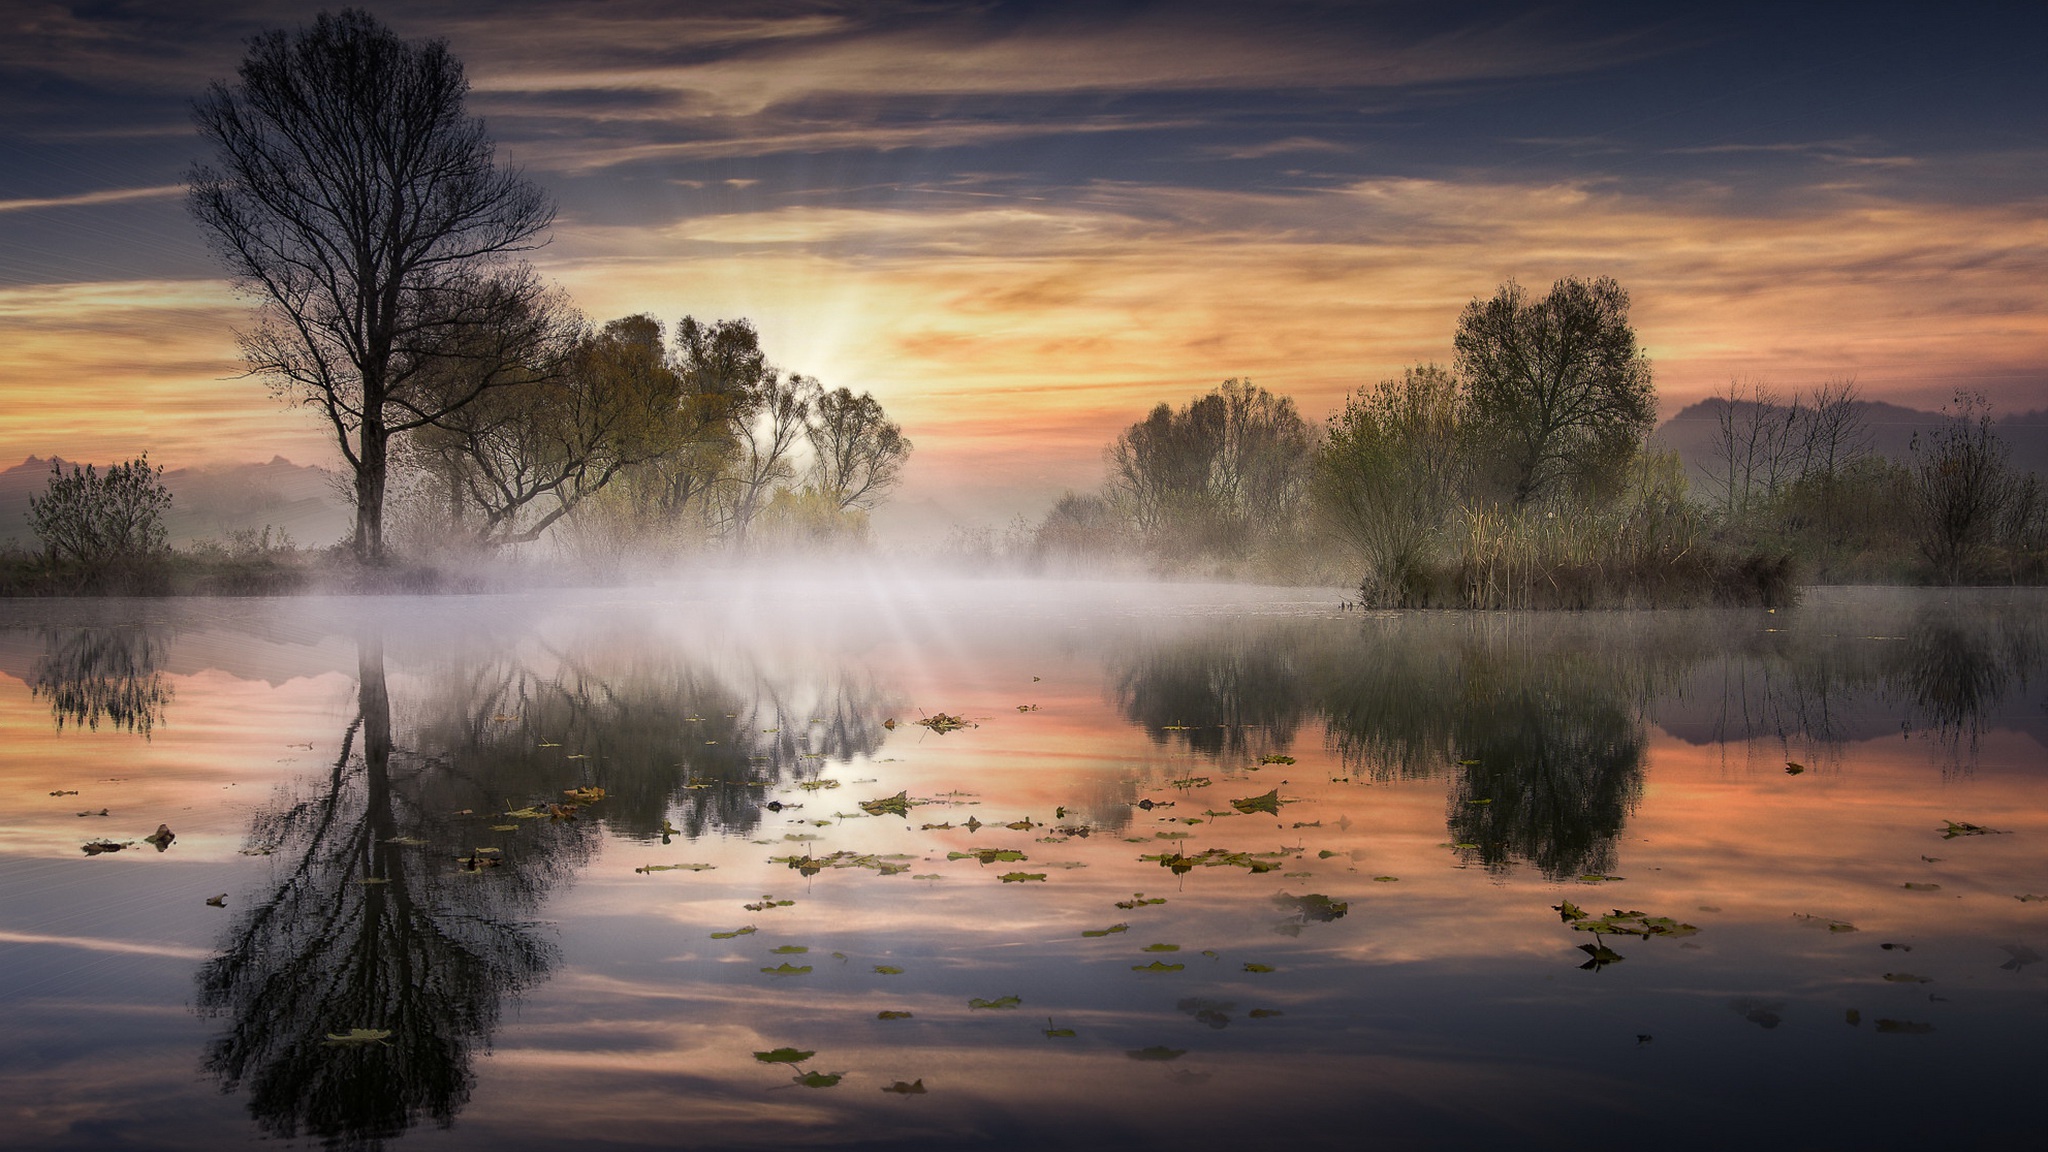 General 2048x1152 outdoors nature landscape mist reflection water calm waters sky sunlight trees